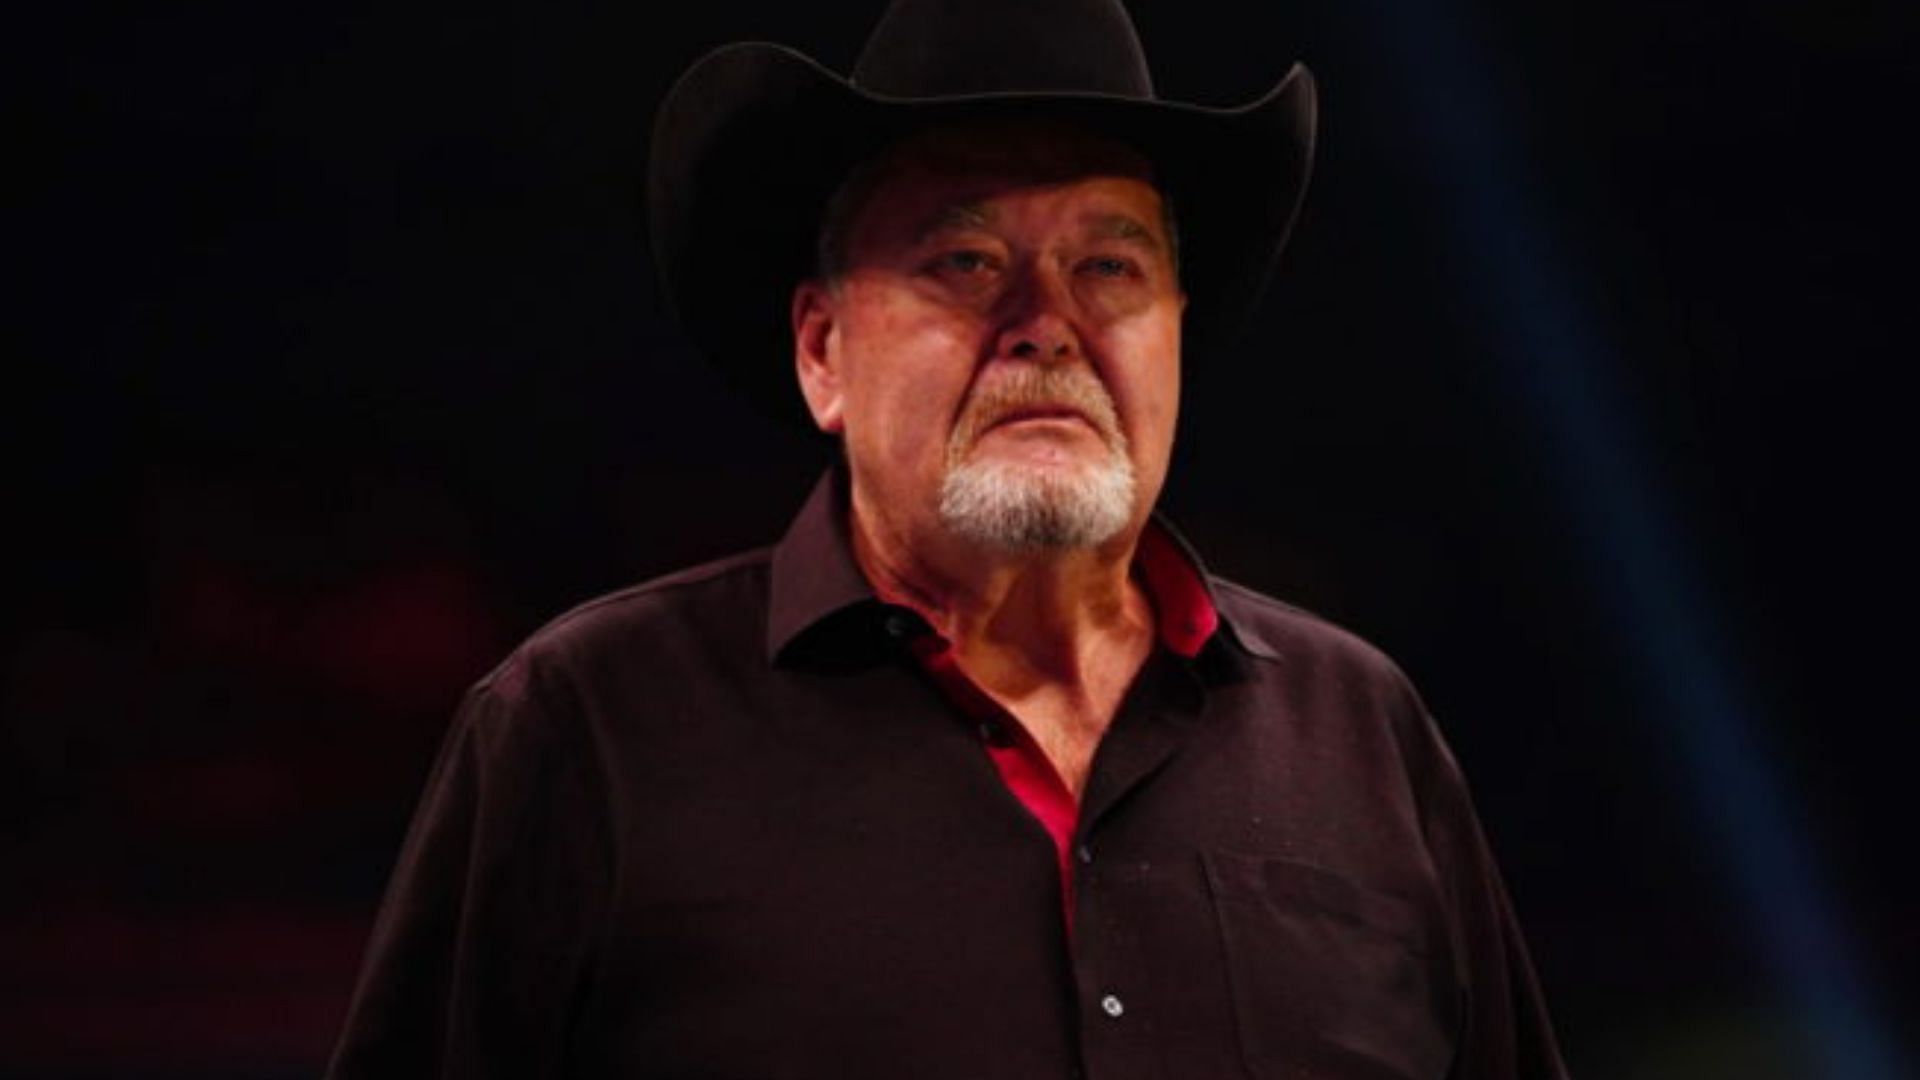 Jim Ross is currently signed with All Elite Wrestling